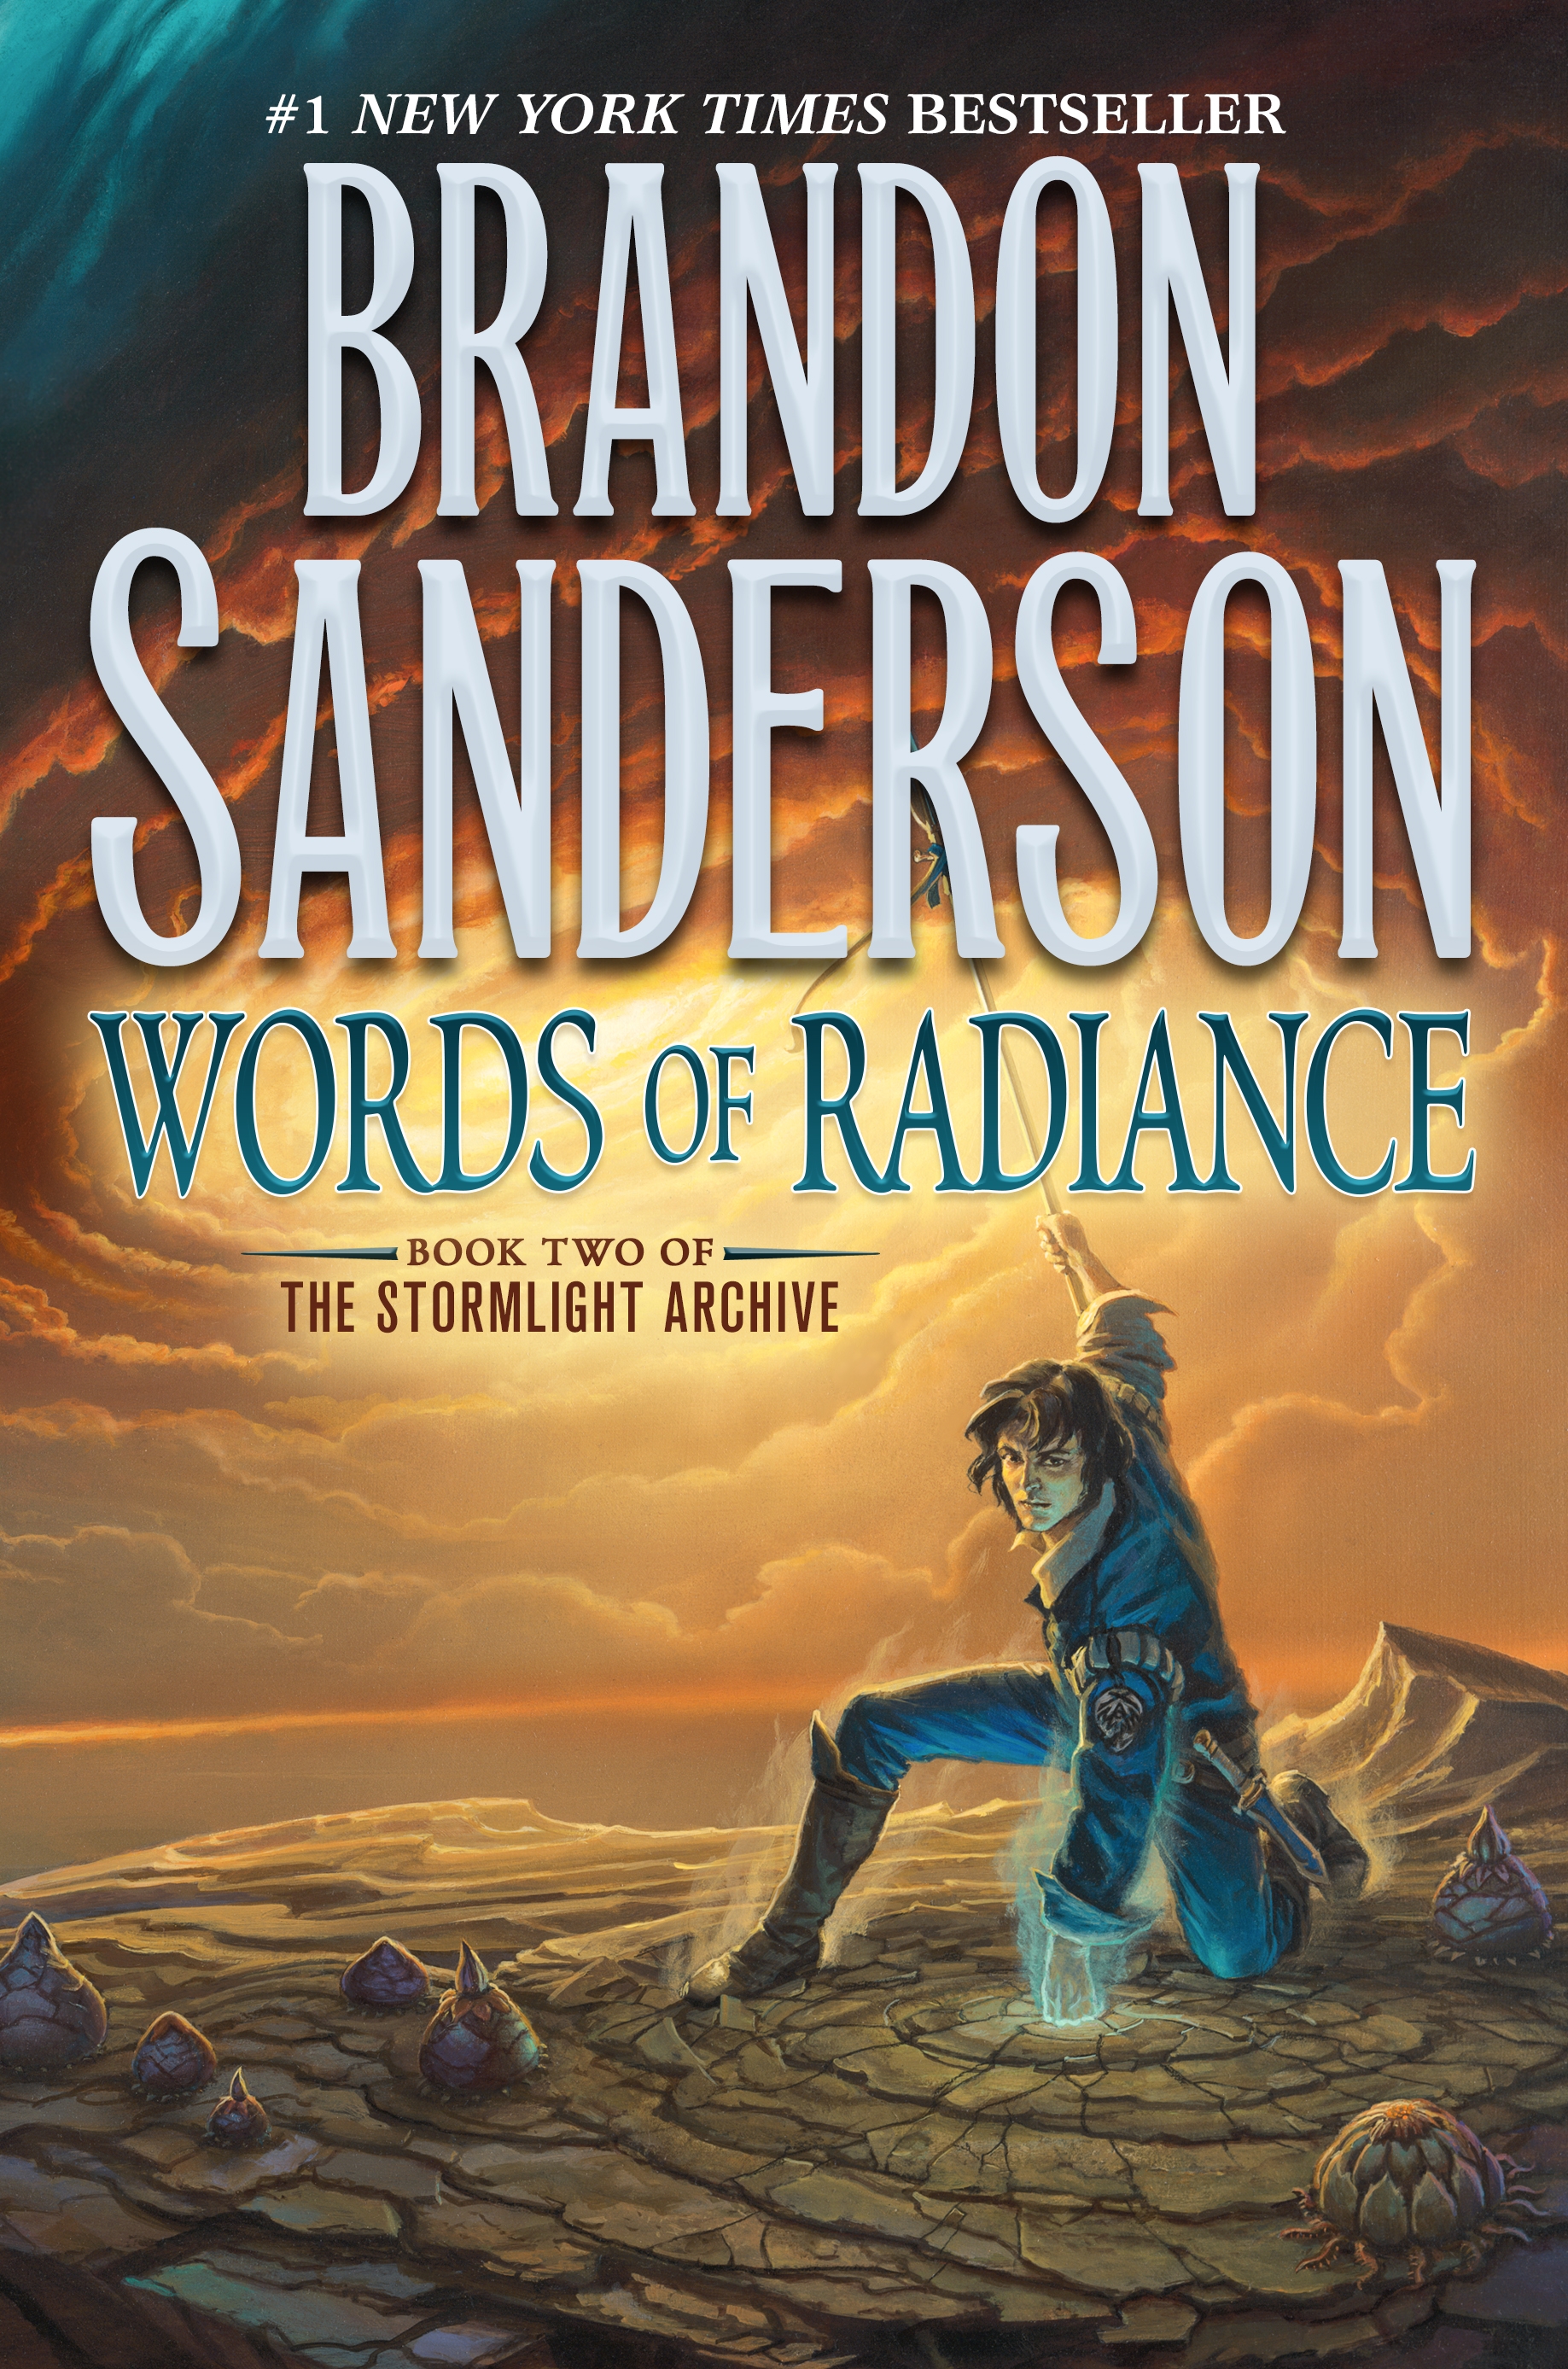 Words of Radiance : Book Two of the Stormlight Archive by Brandon Sanderson